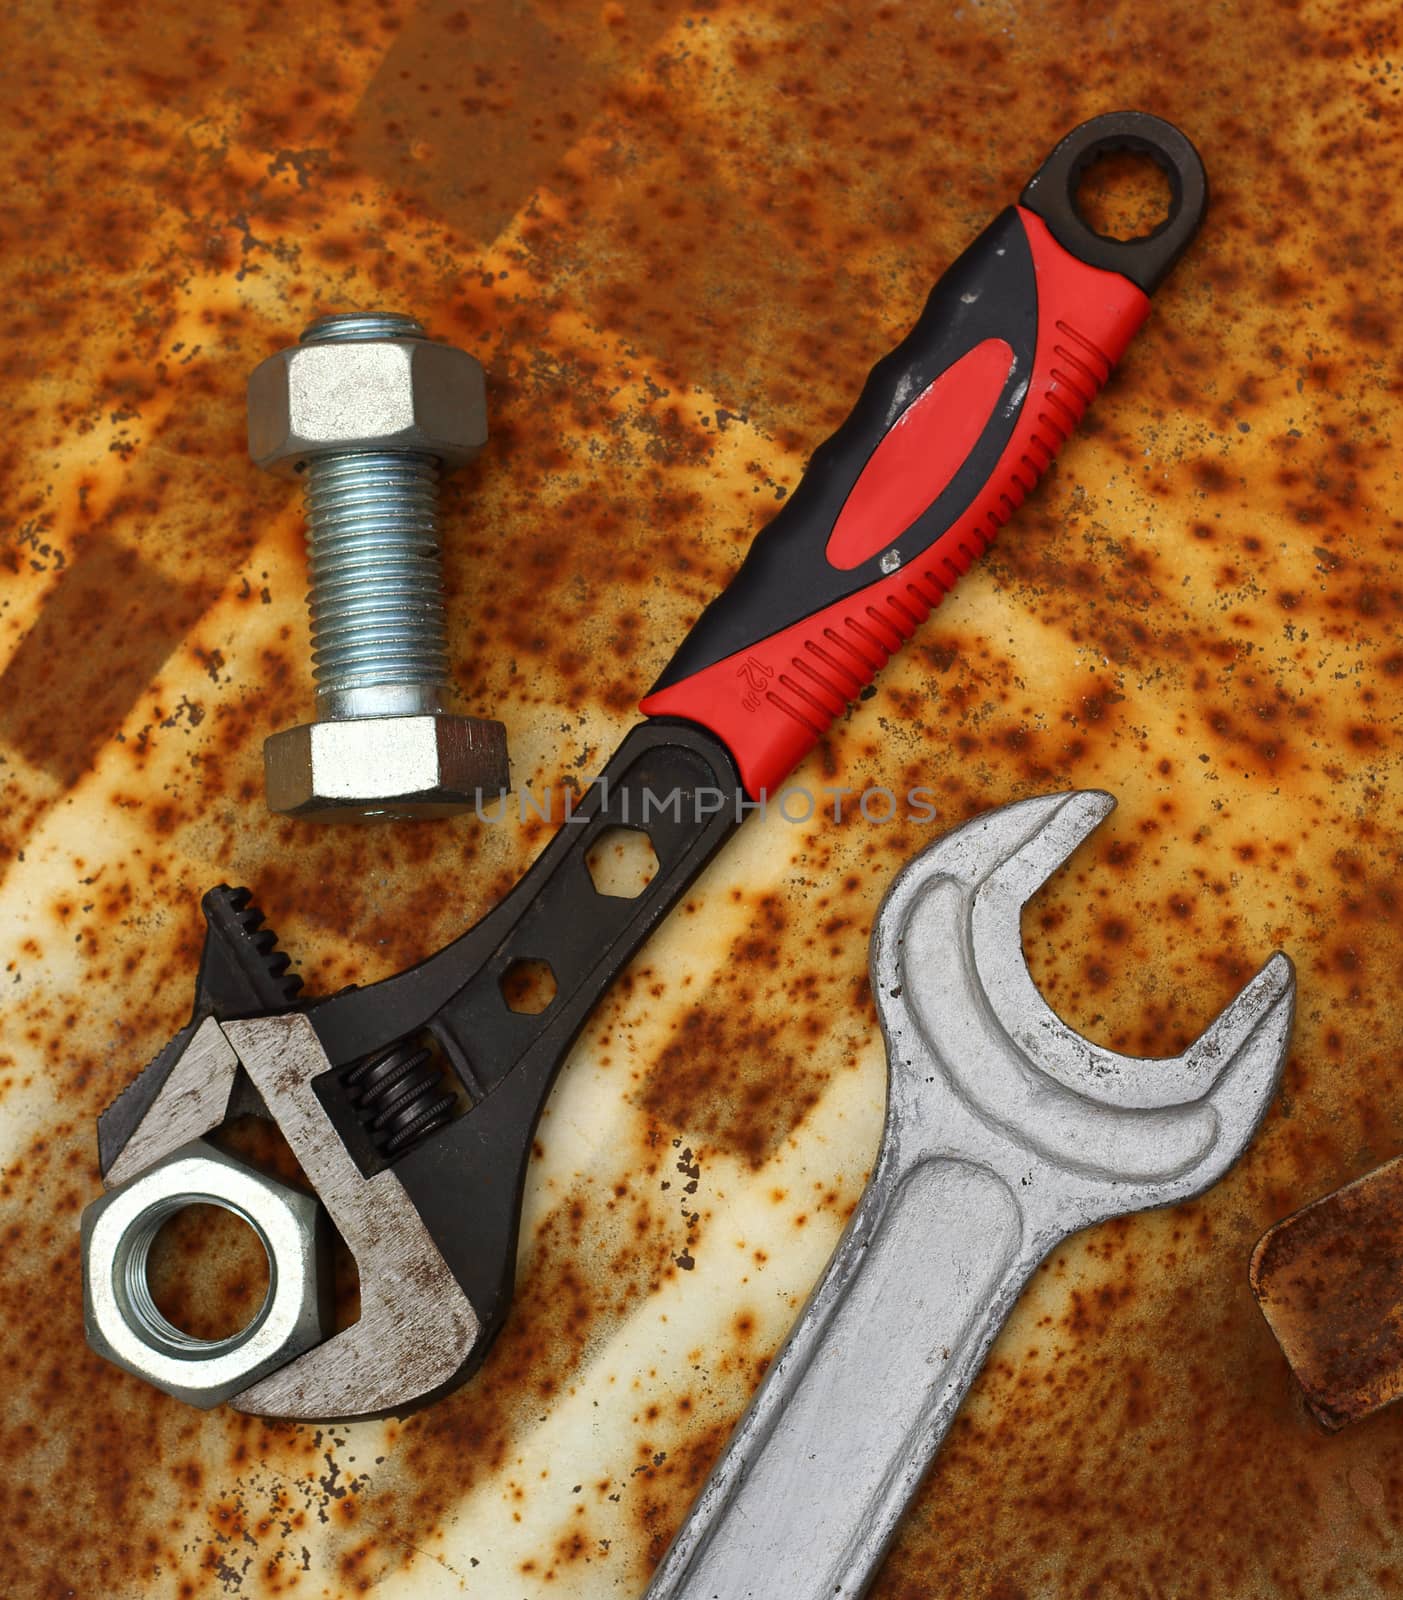 wrenches by alexkosev